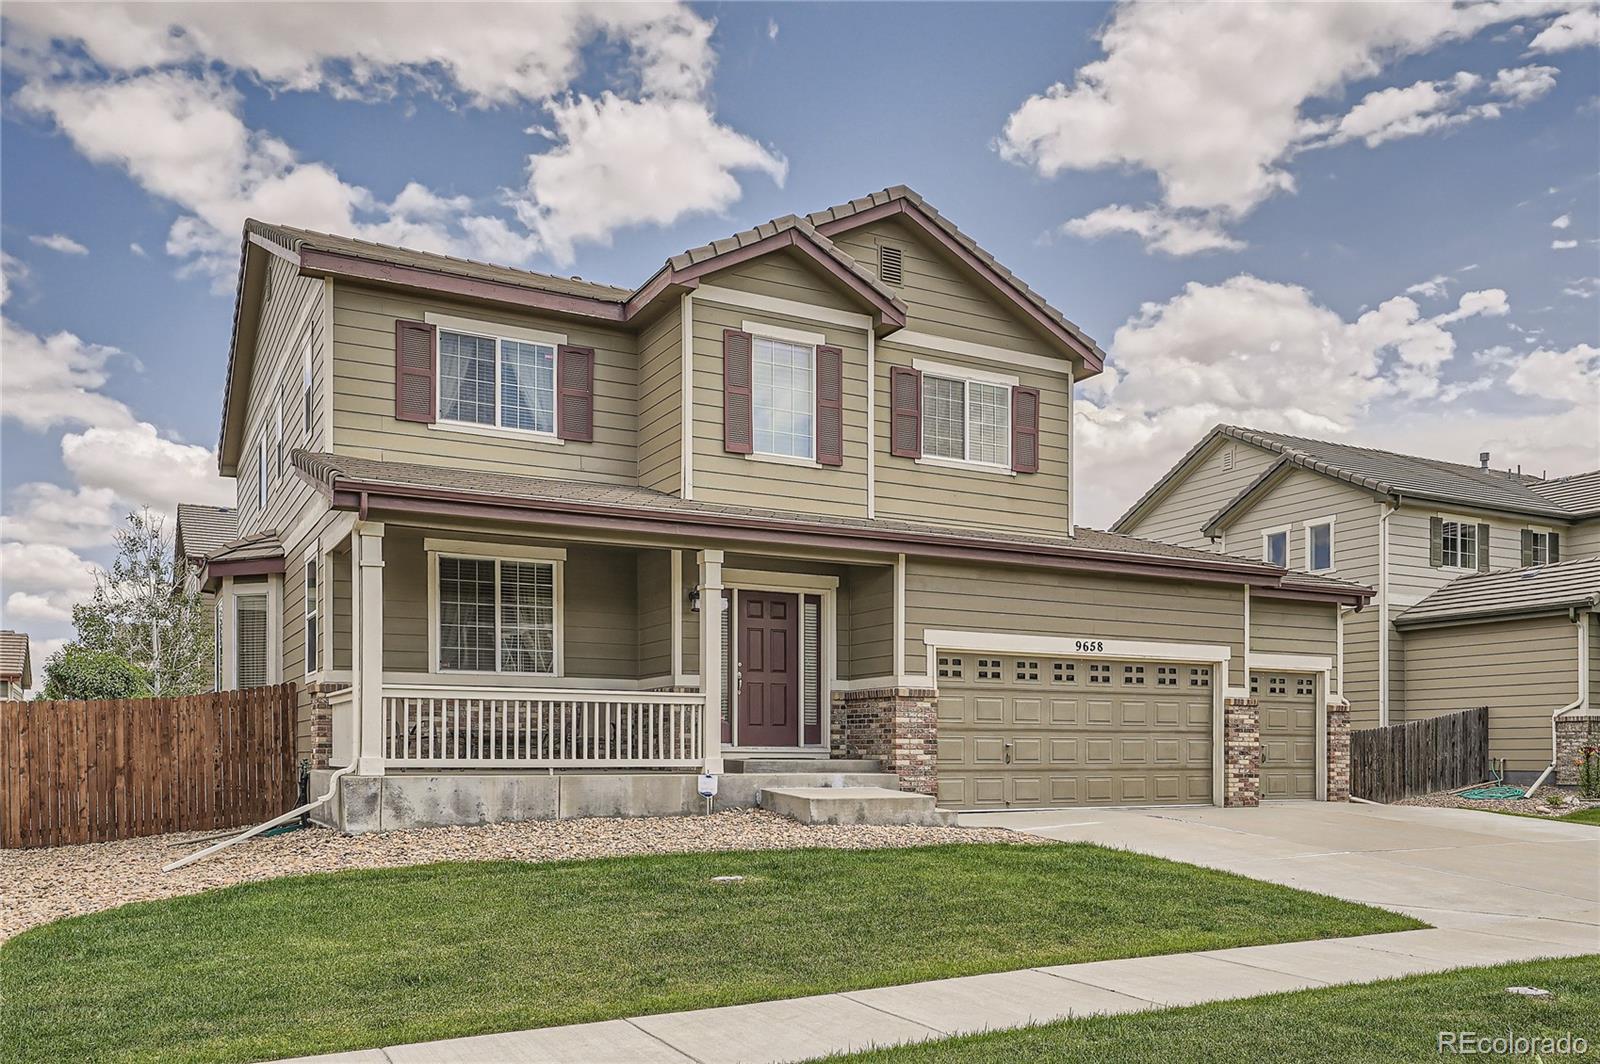 9658  olathe street, commerce city sold home. Closed on 2024-04-26 for $639,000.